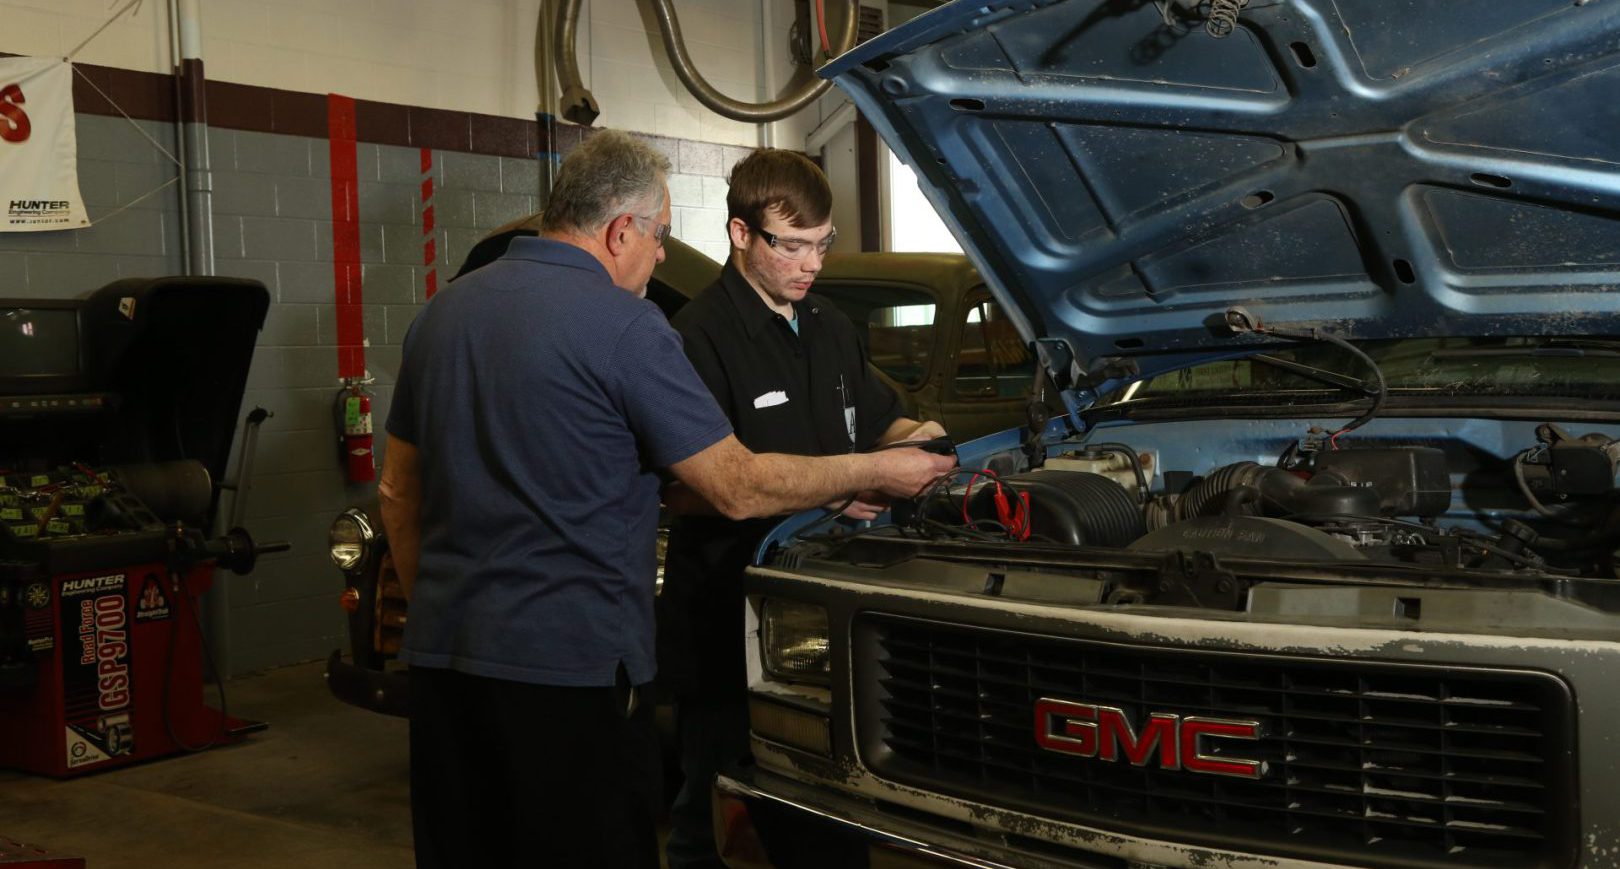 Student and Instructor working on a car